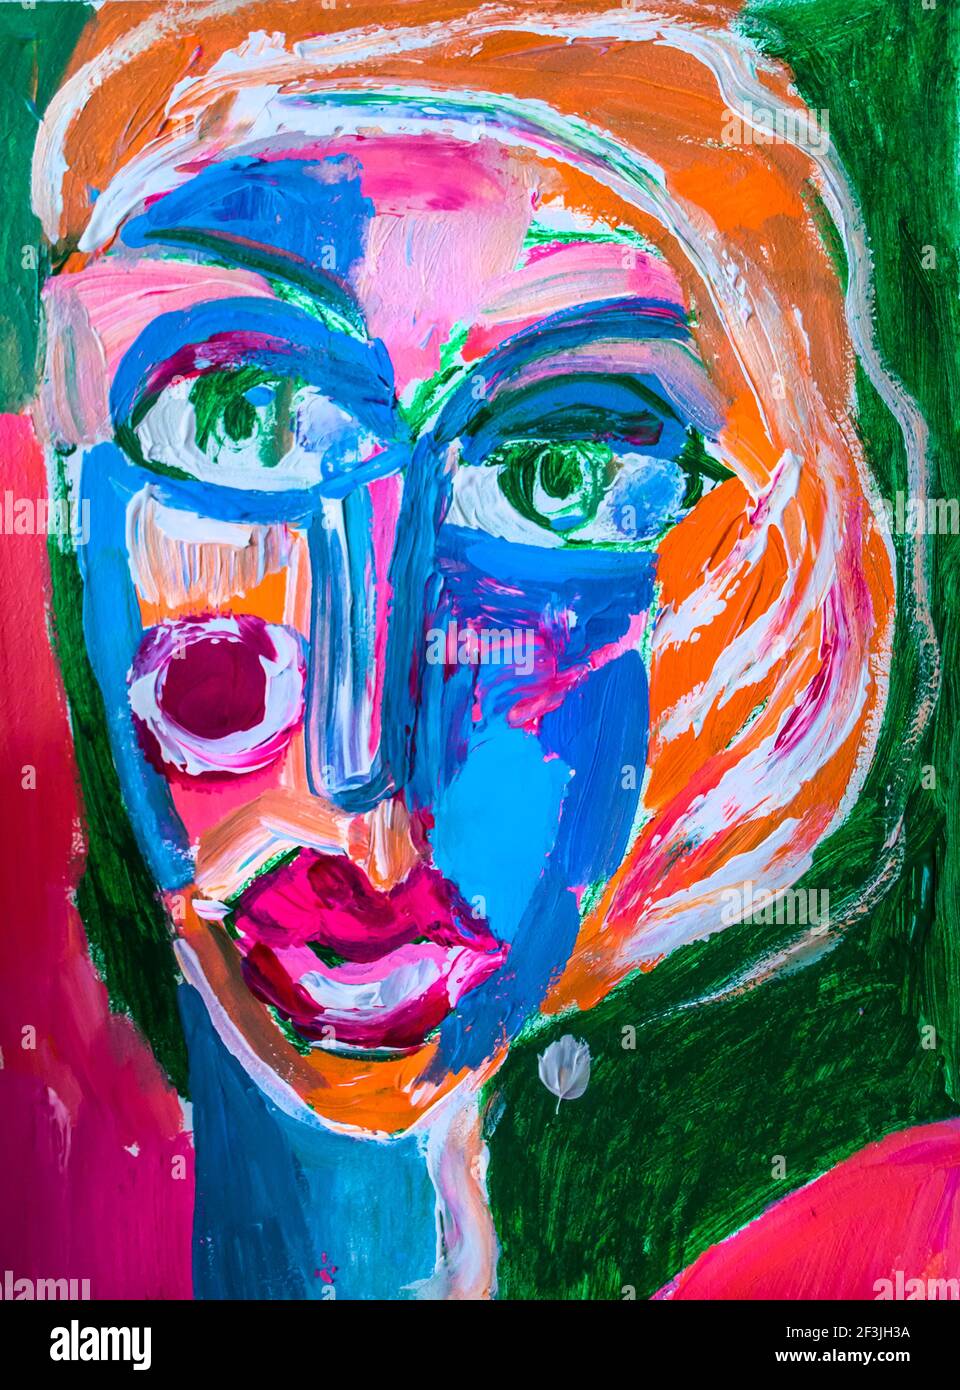 Painting acrylic canvas portrait of woman abstraction. Emotional flirtation, joy, coquetry. Stock Photo